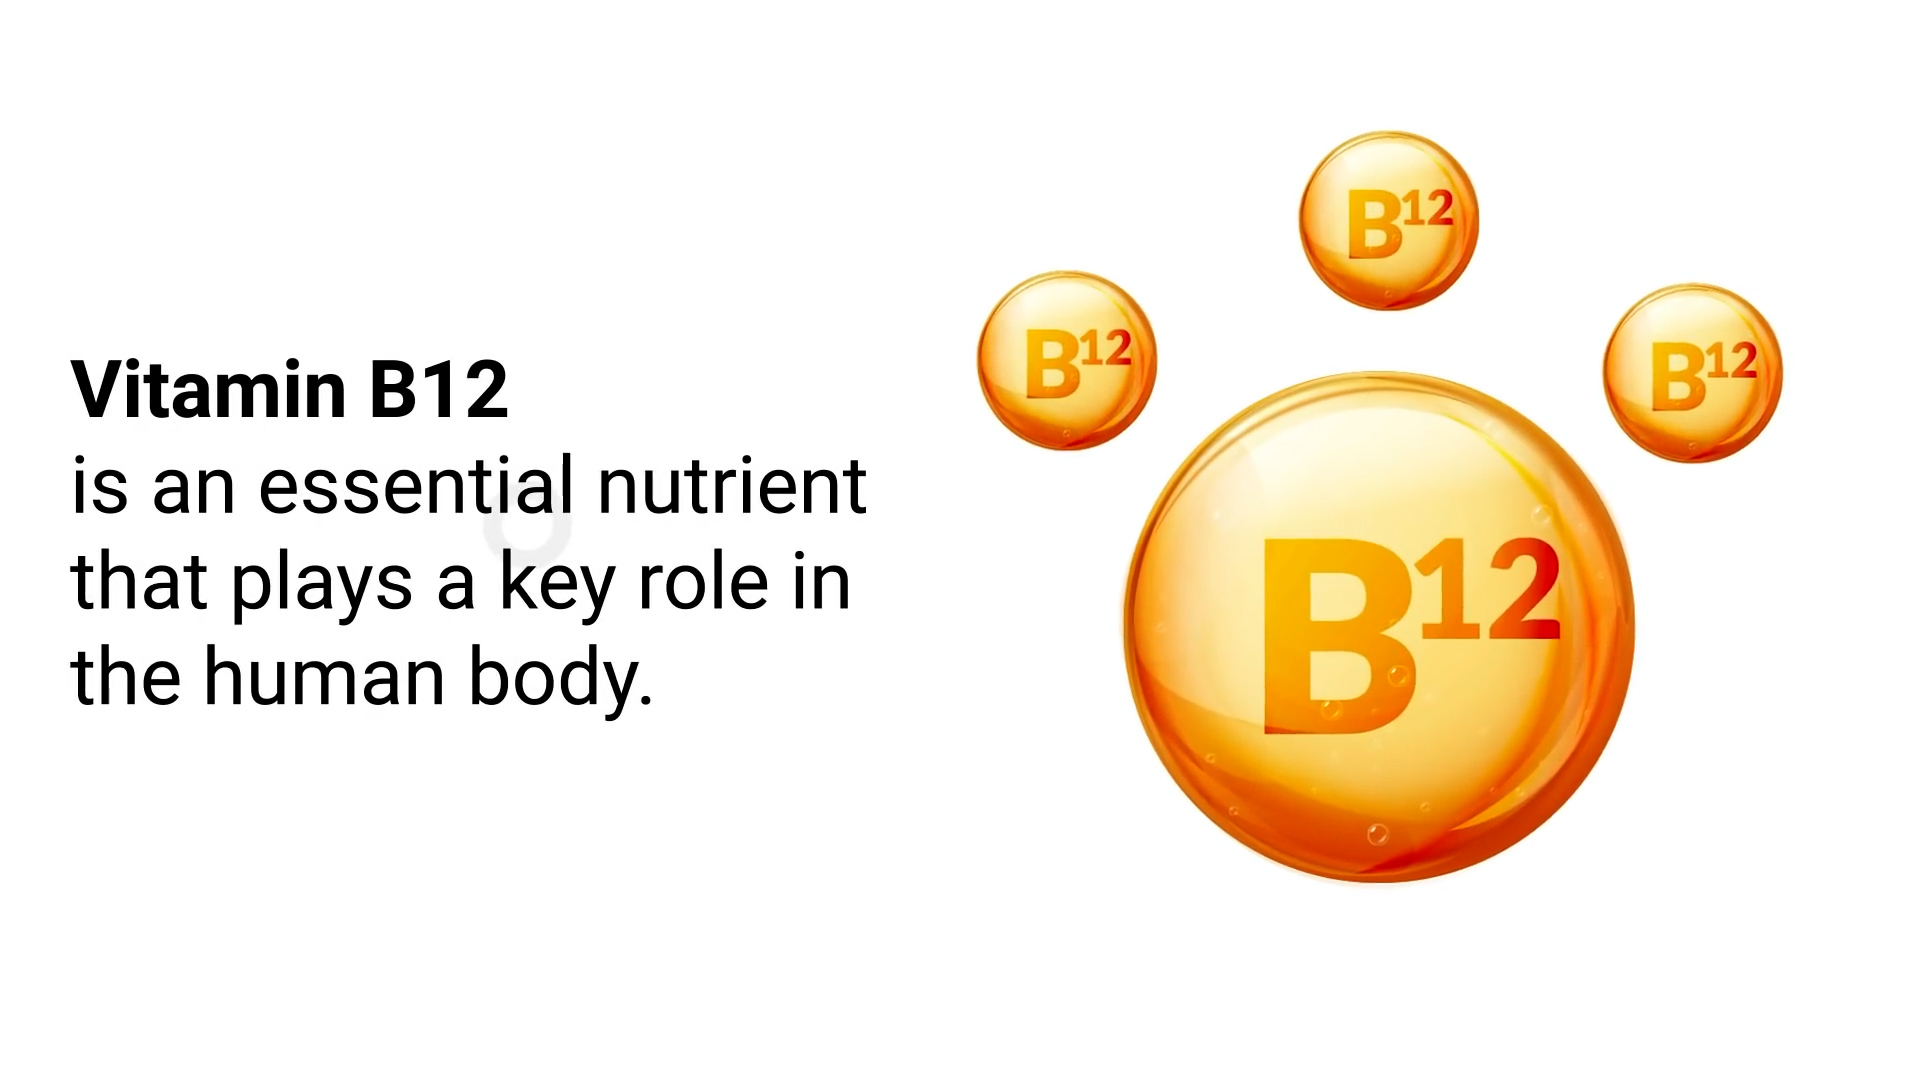 What are the serious consequences of vitamin B12 deficiency?